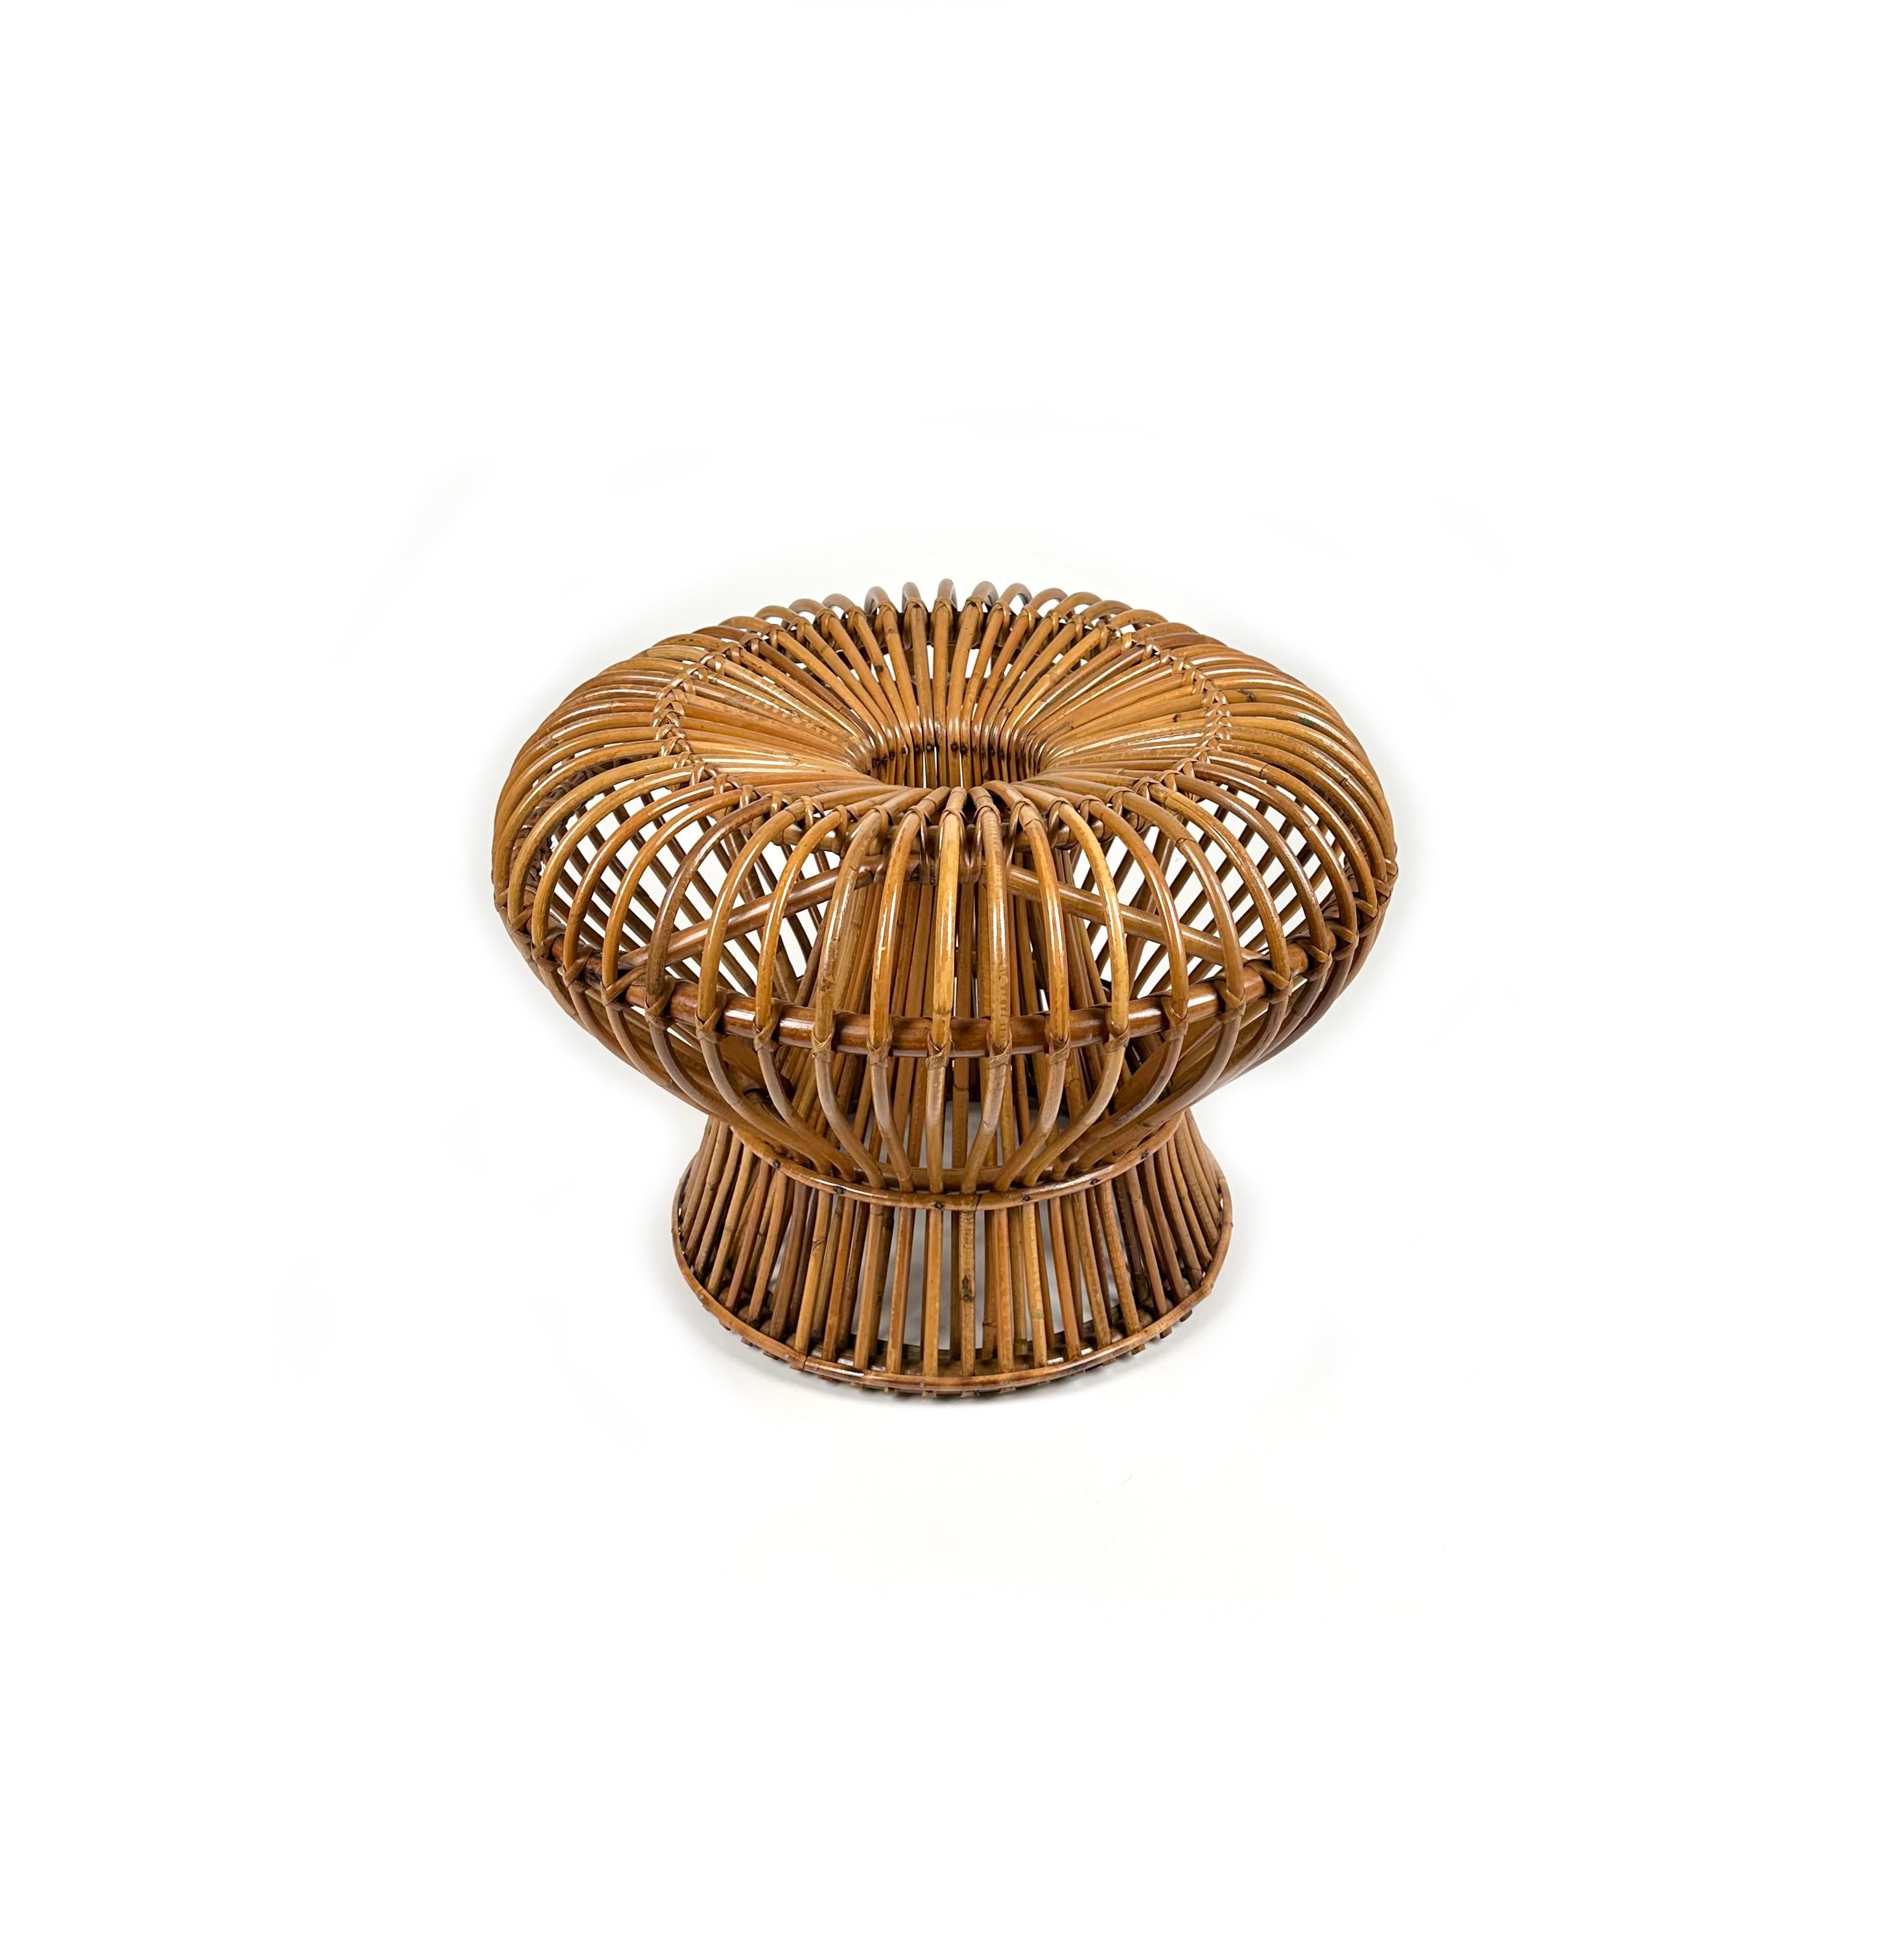 midcentury amazing ottoman / stool / pouf / side table in bamboo and rattan in the style of Franco Albini.

This lovely piece is very well crafted of high quality rattan, ginving it a truly eye-catching appearance that would really stand out in